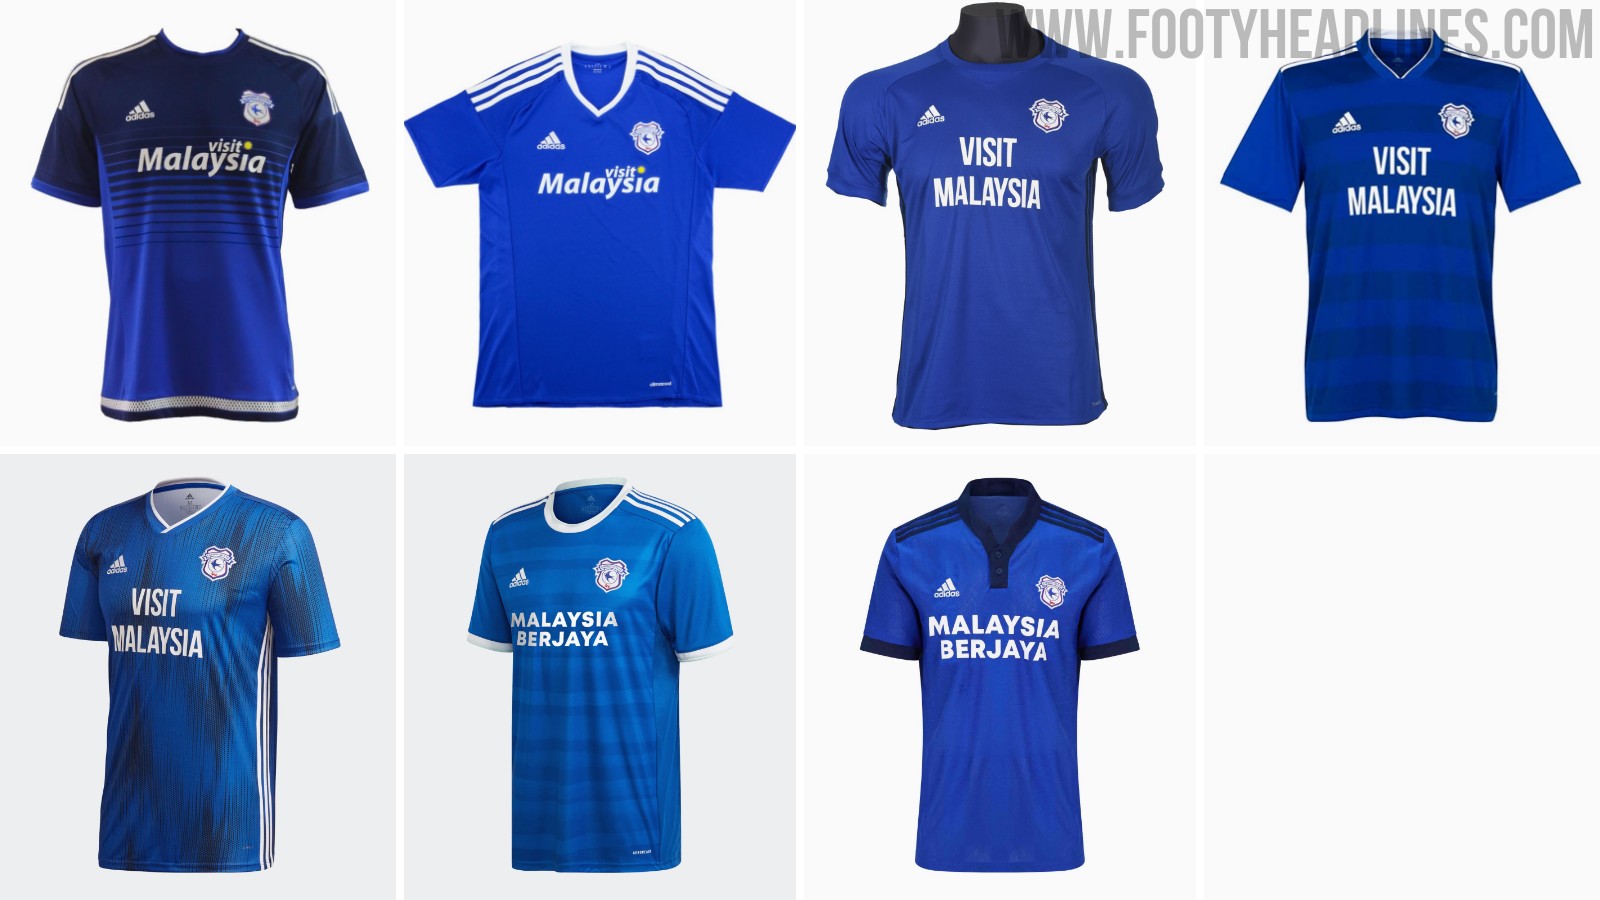 Cardiff City sell £100,000 worth of Adidas kit in record breaking opening  sales day - Wales Online